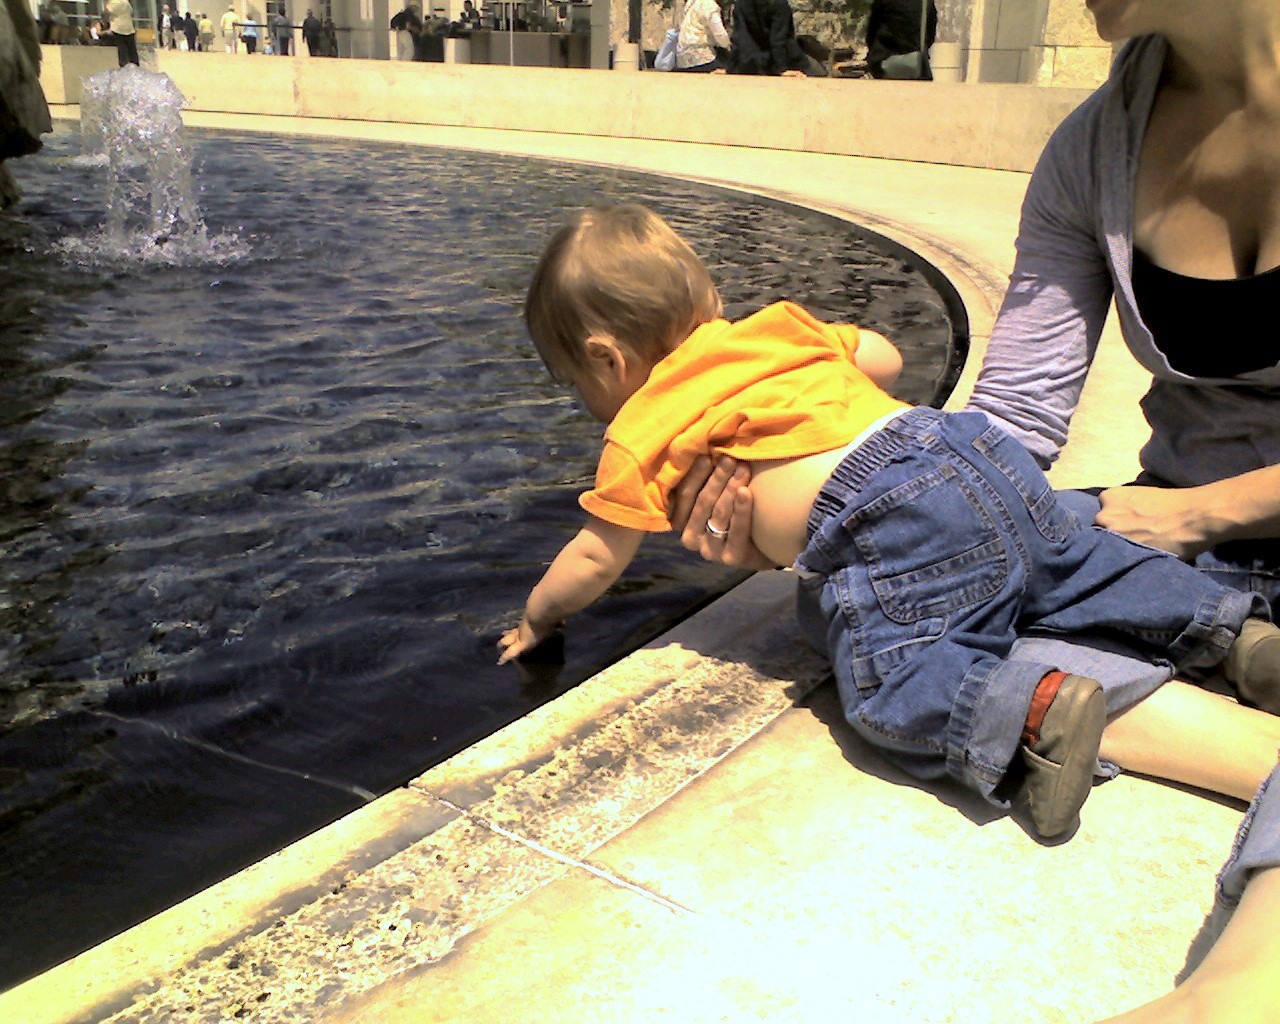 [Alé+playing+in+the+fountain.jpg]